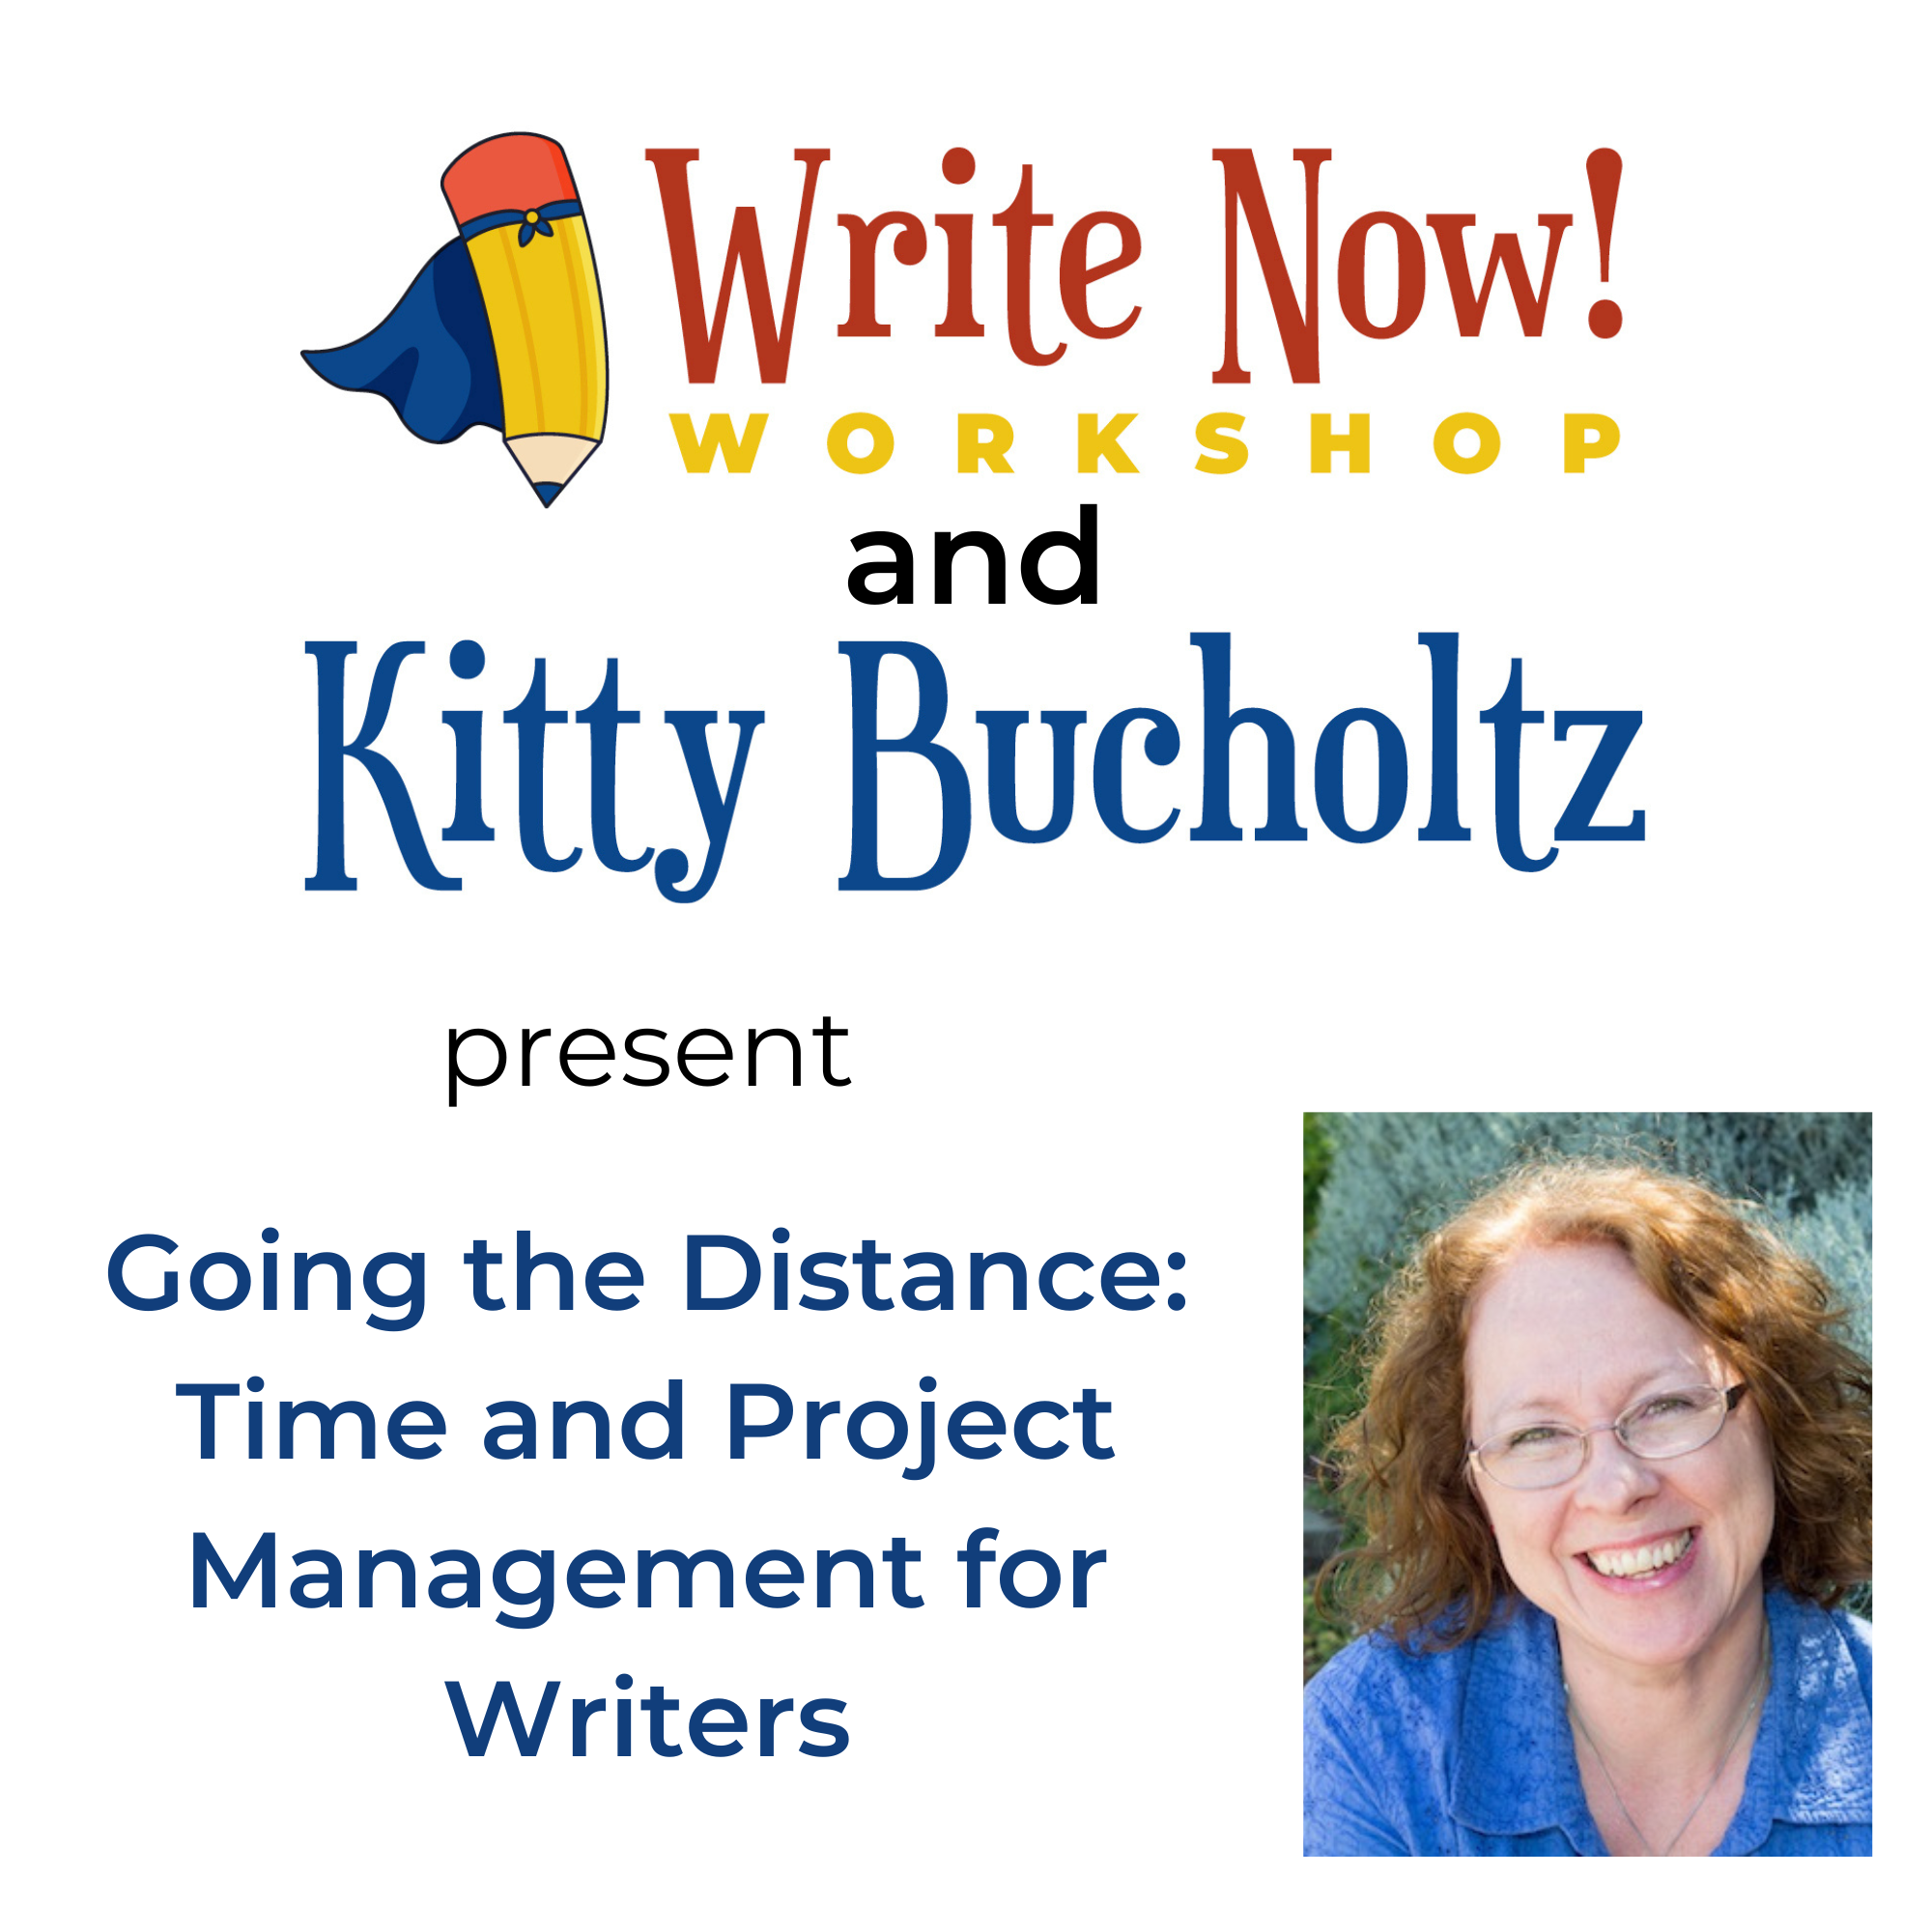 Write Now! Workshop and Kitty Bucholtz present Going the Distance: Time and Project Management for Writers